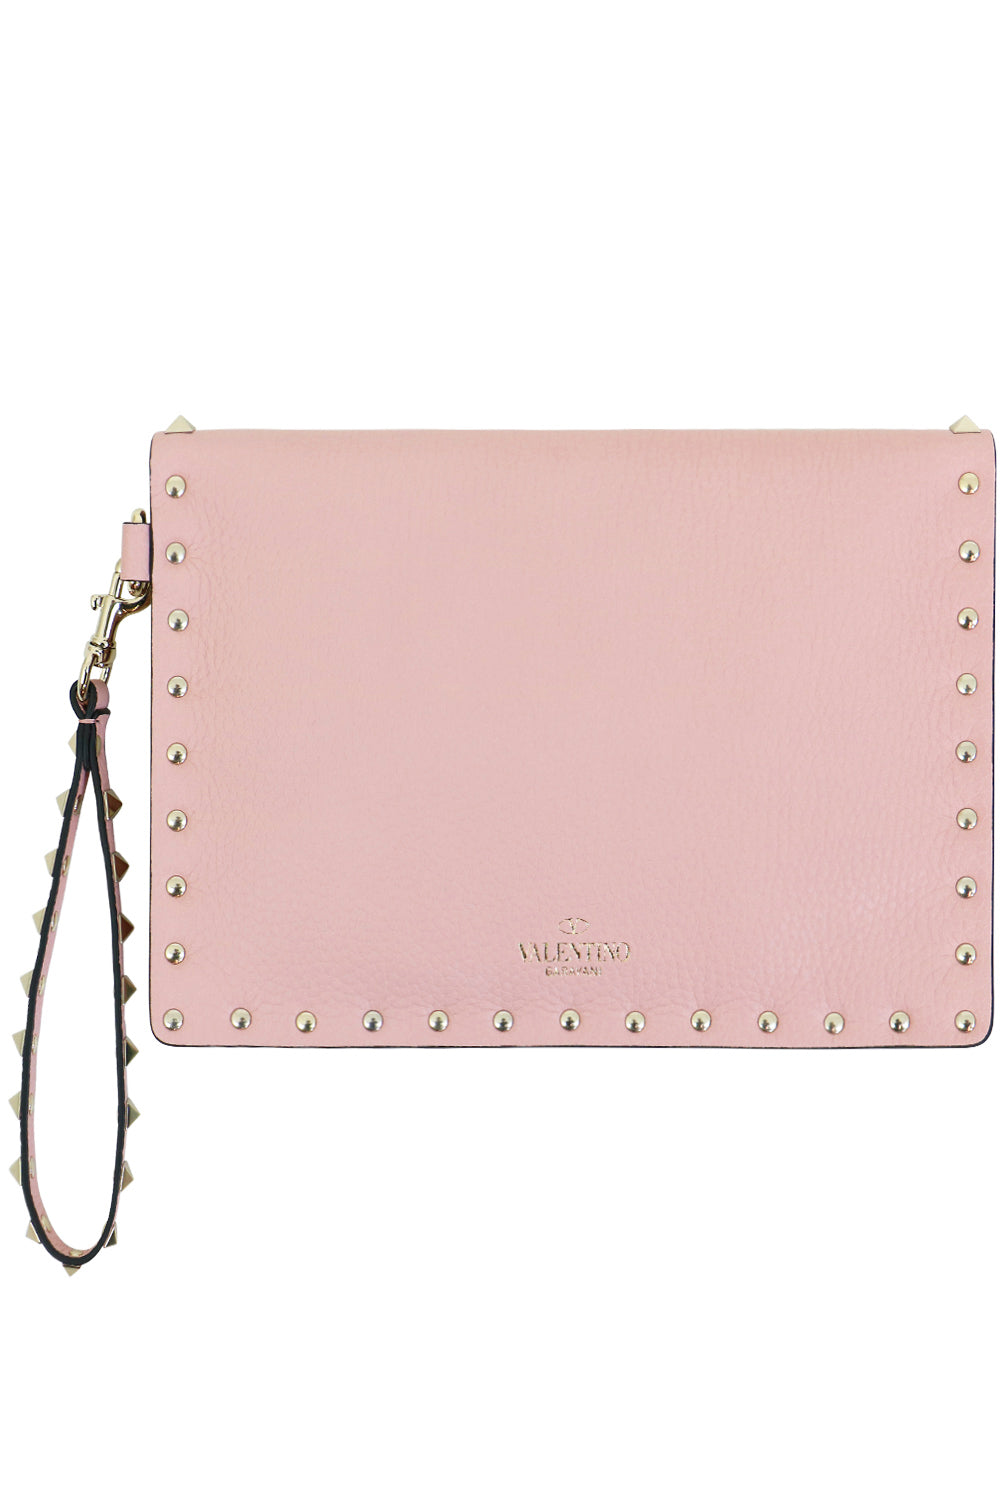 VALENTINO BAGS PINK SMALL ROCKSTUD ENVELOPE POUCH GRAINED LEATHER WATER ROSE